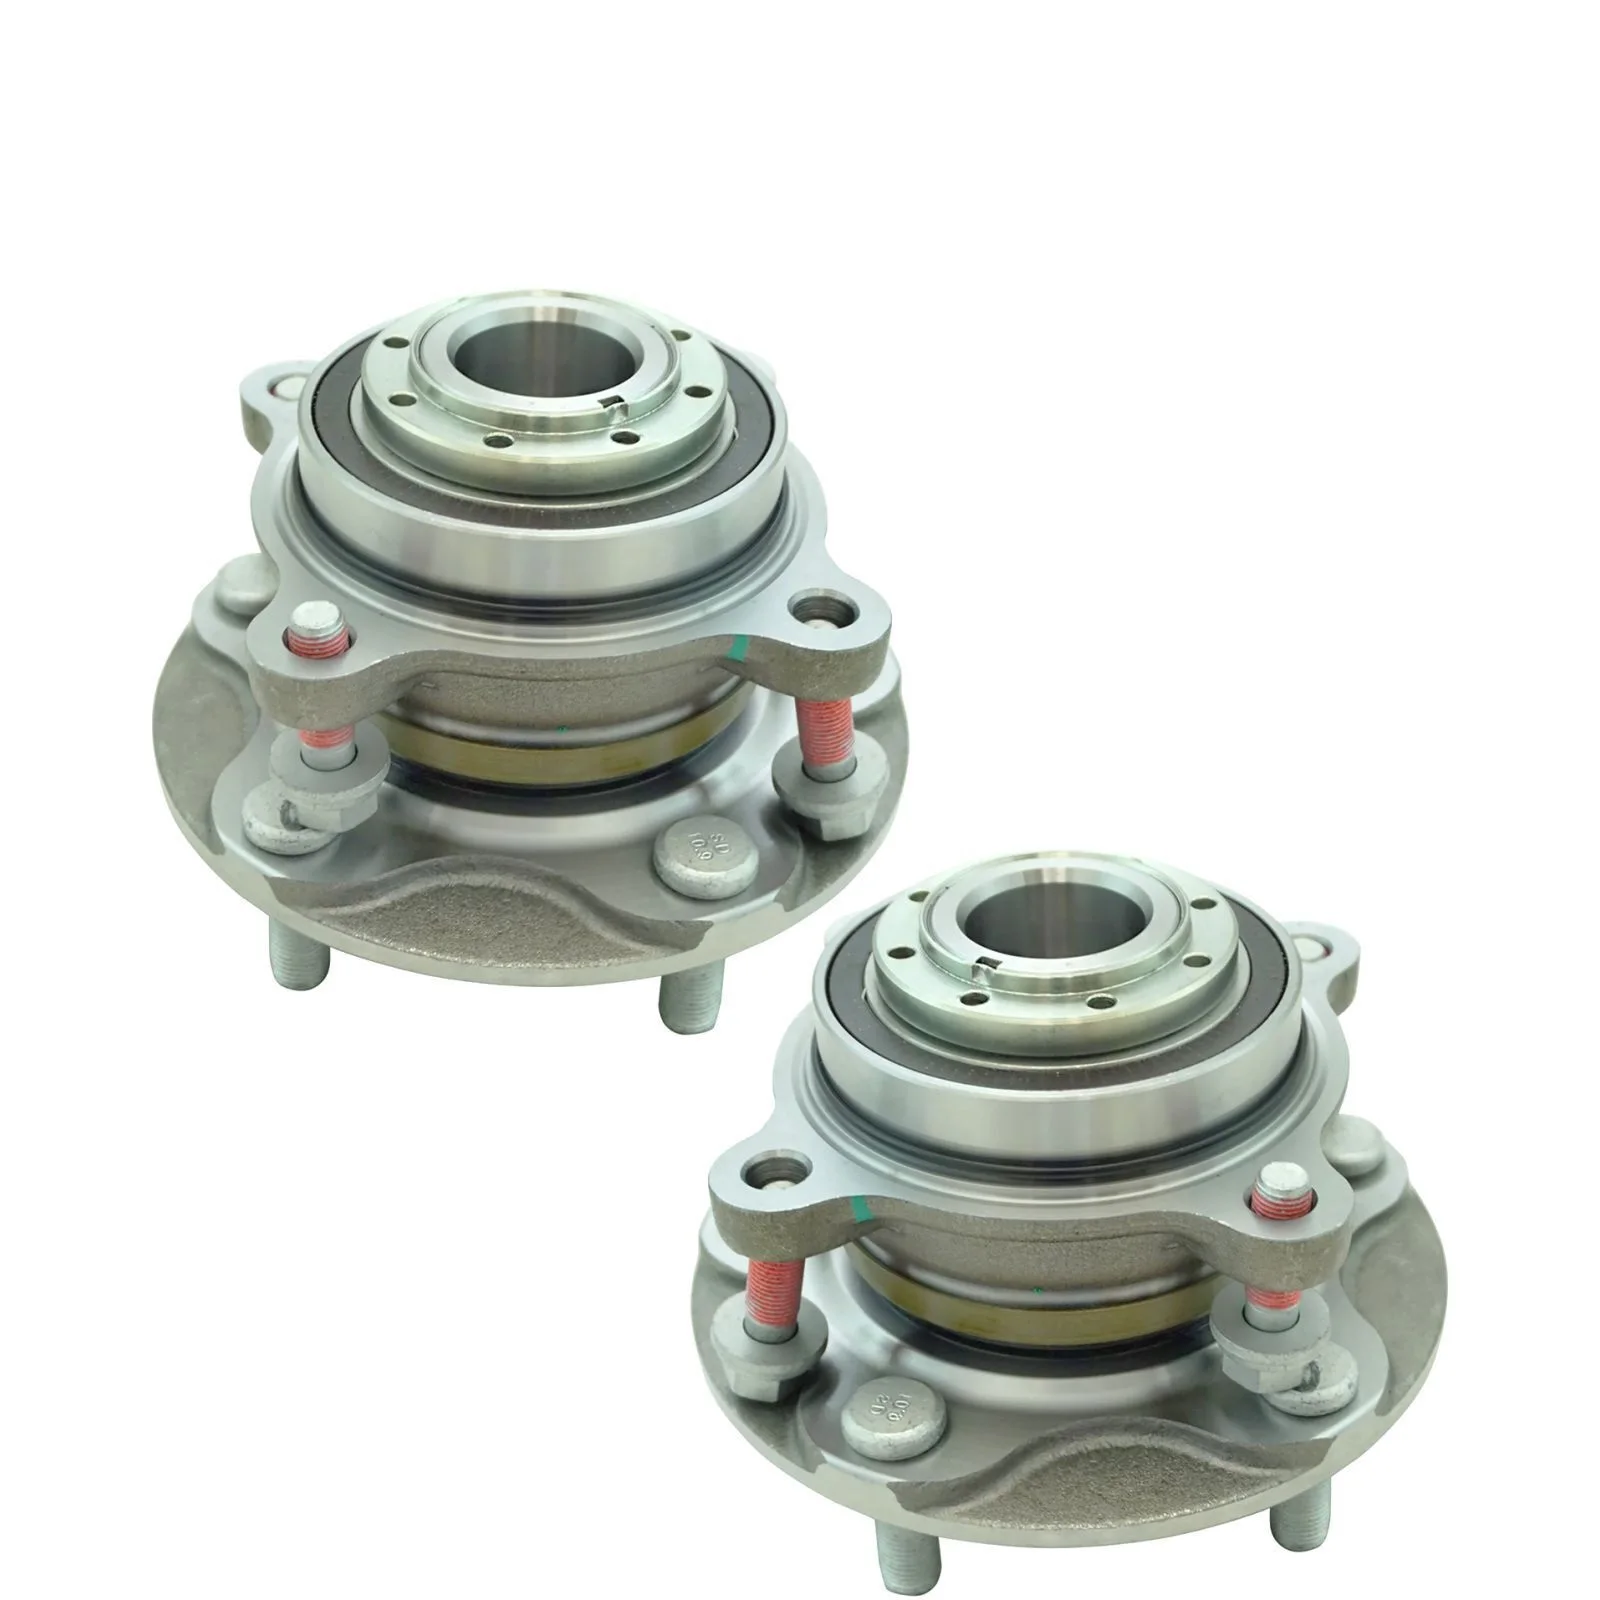 

2x Front Wheel Bearing & Hub Assembly LH & RH Pair for Sequoia Tundra 2WD Truck SUV